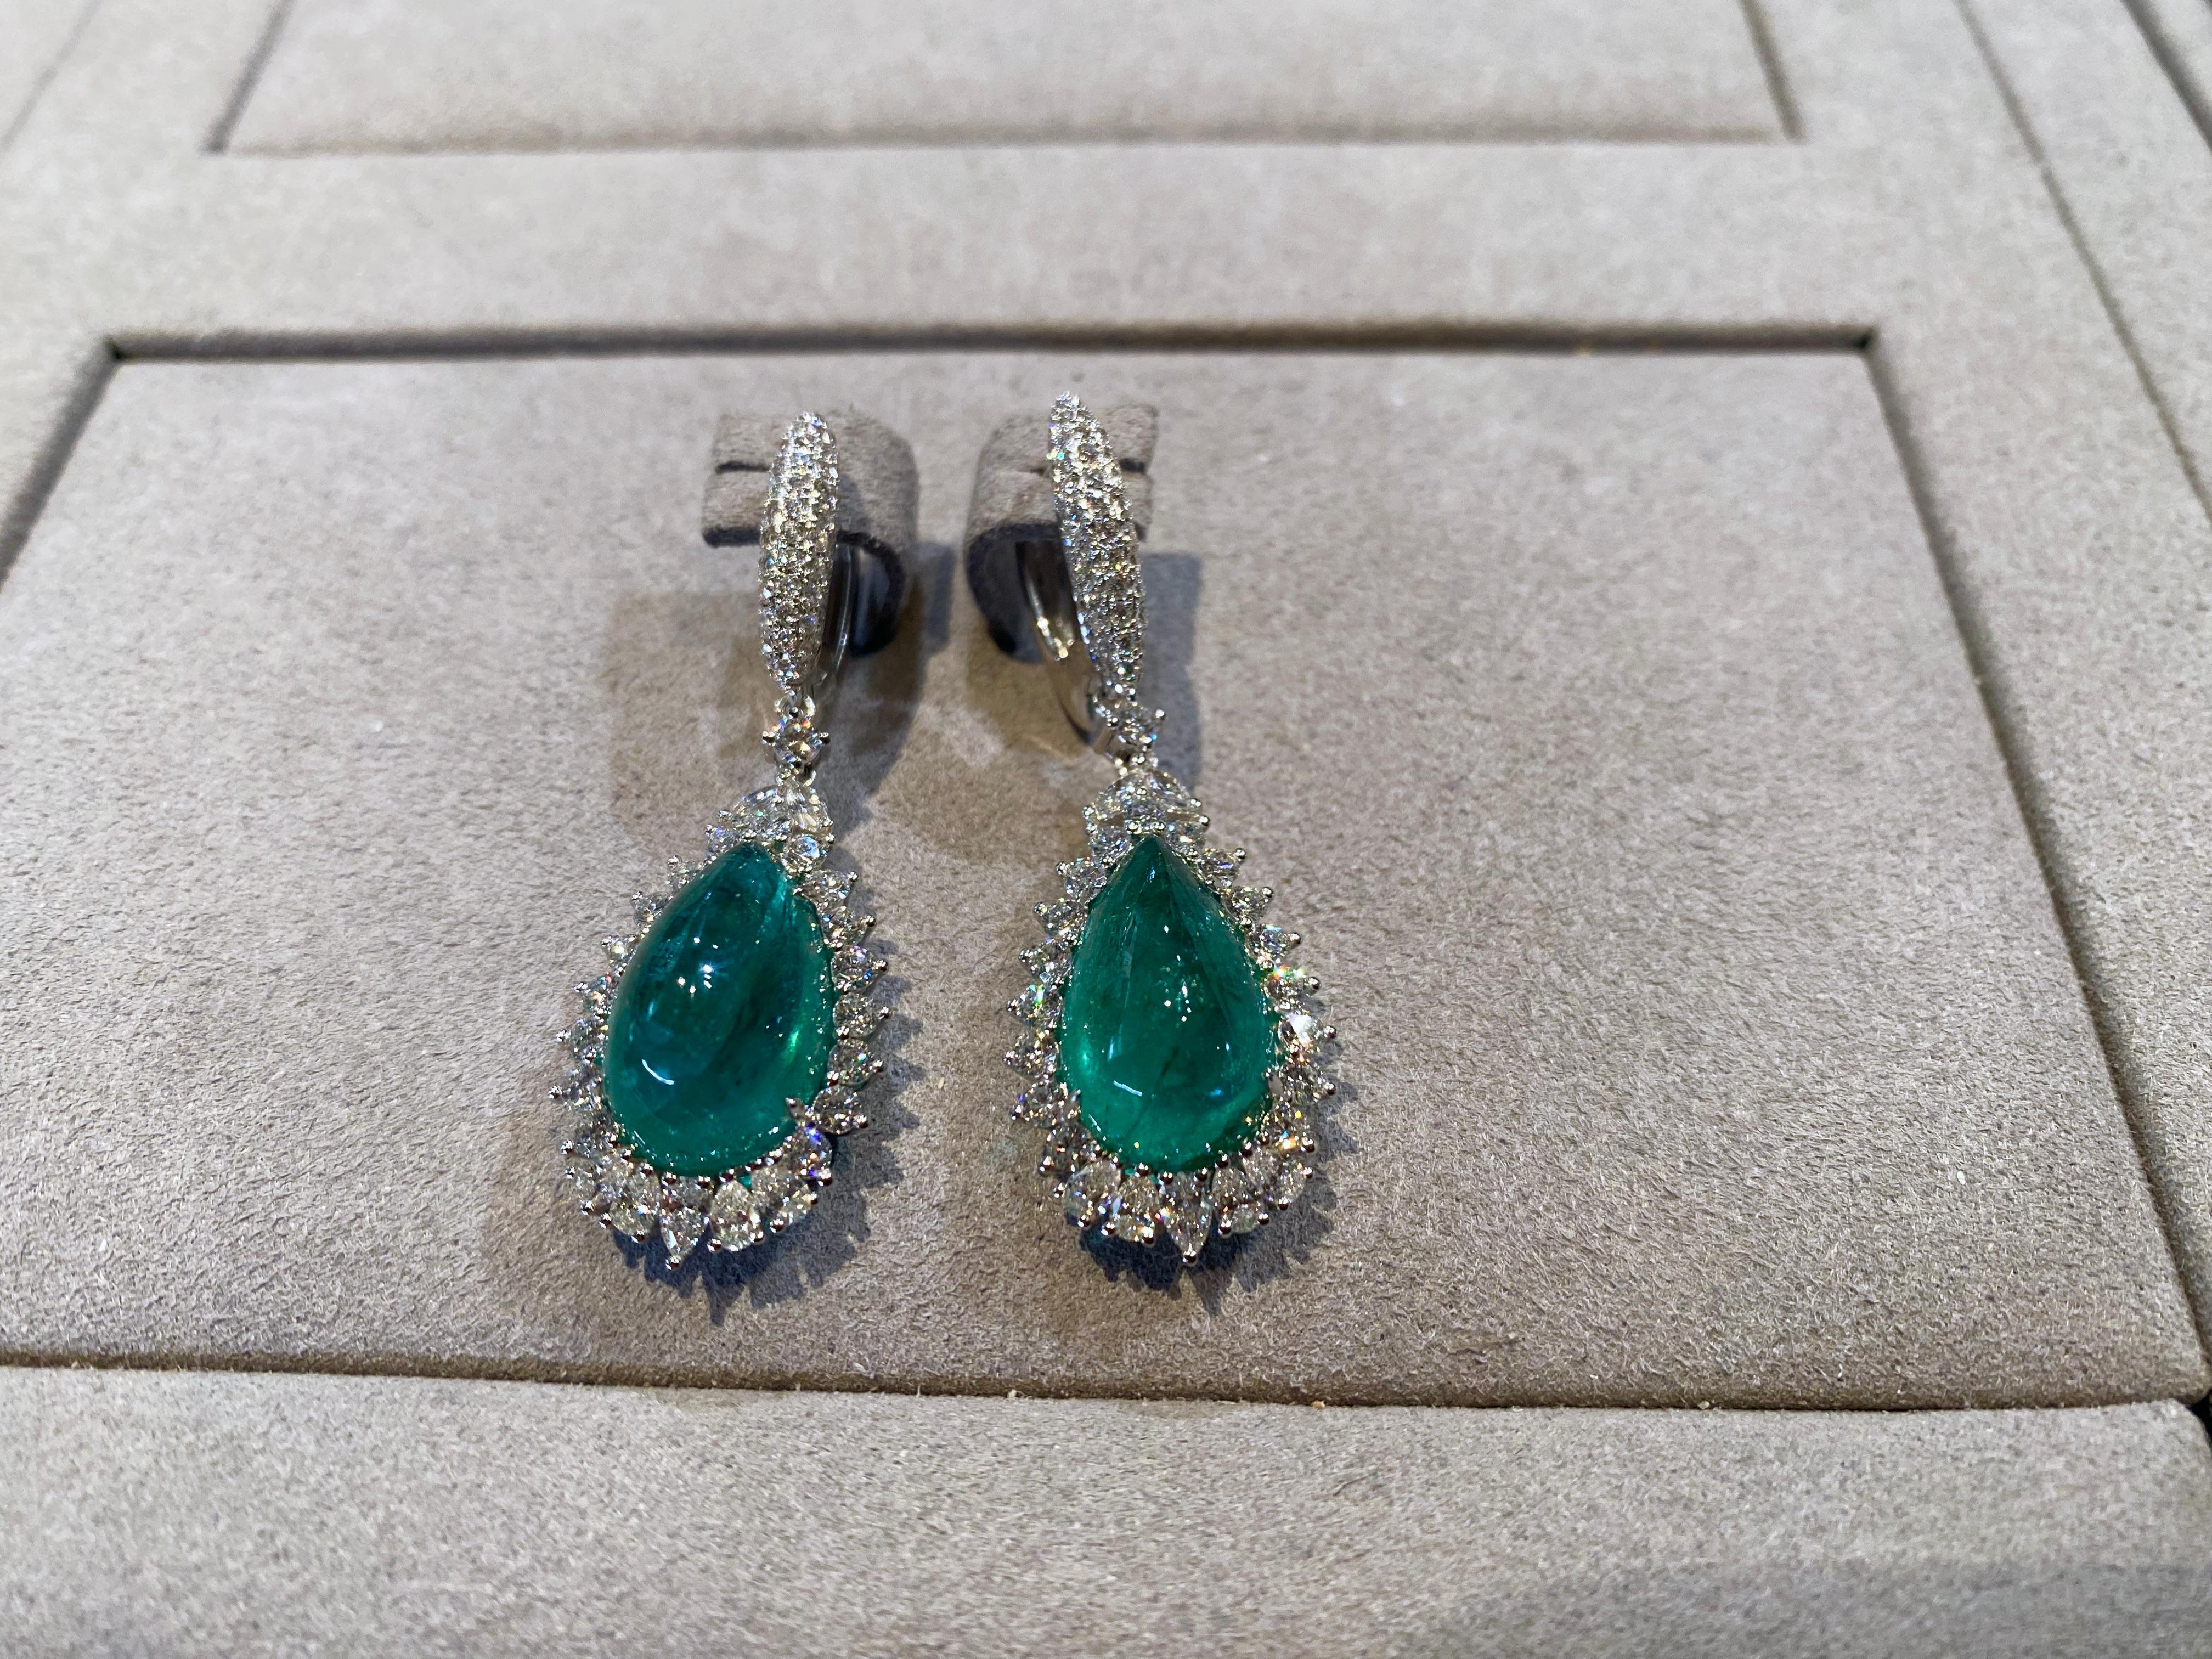 This is a Pair of Dangle Earring consists of 16.79 ct of Emerald Cabochon.  Around each Emerald there is circle of diamond pave, those diamonds are very important in reflecting fire and brilliance as the sugarlof and cabochon cutting doesn't come